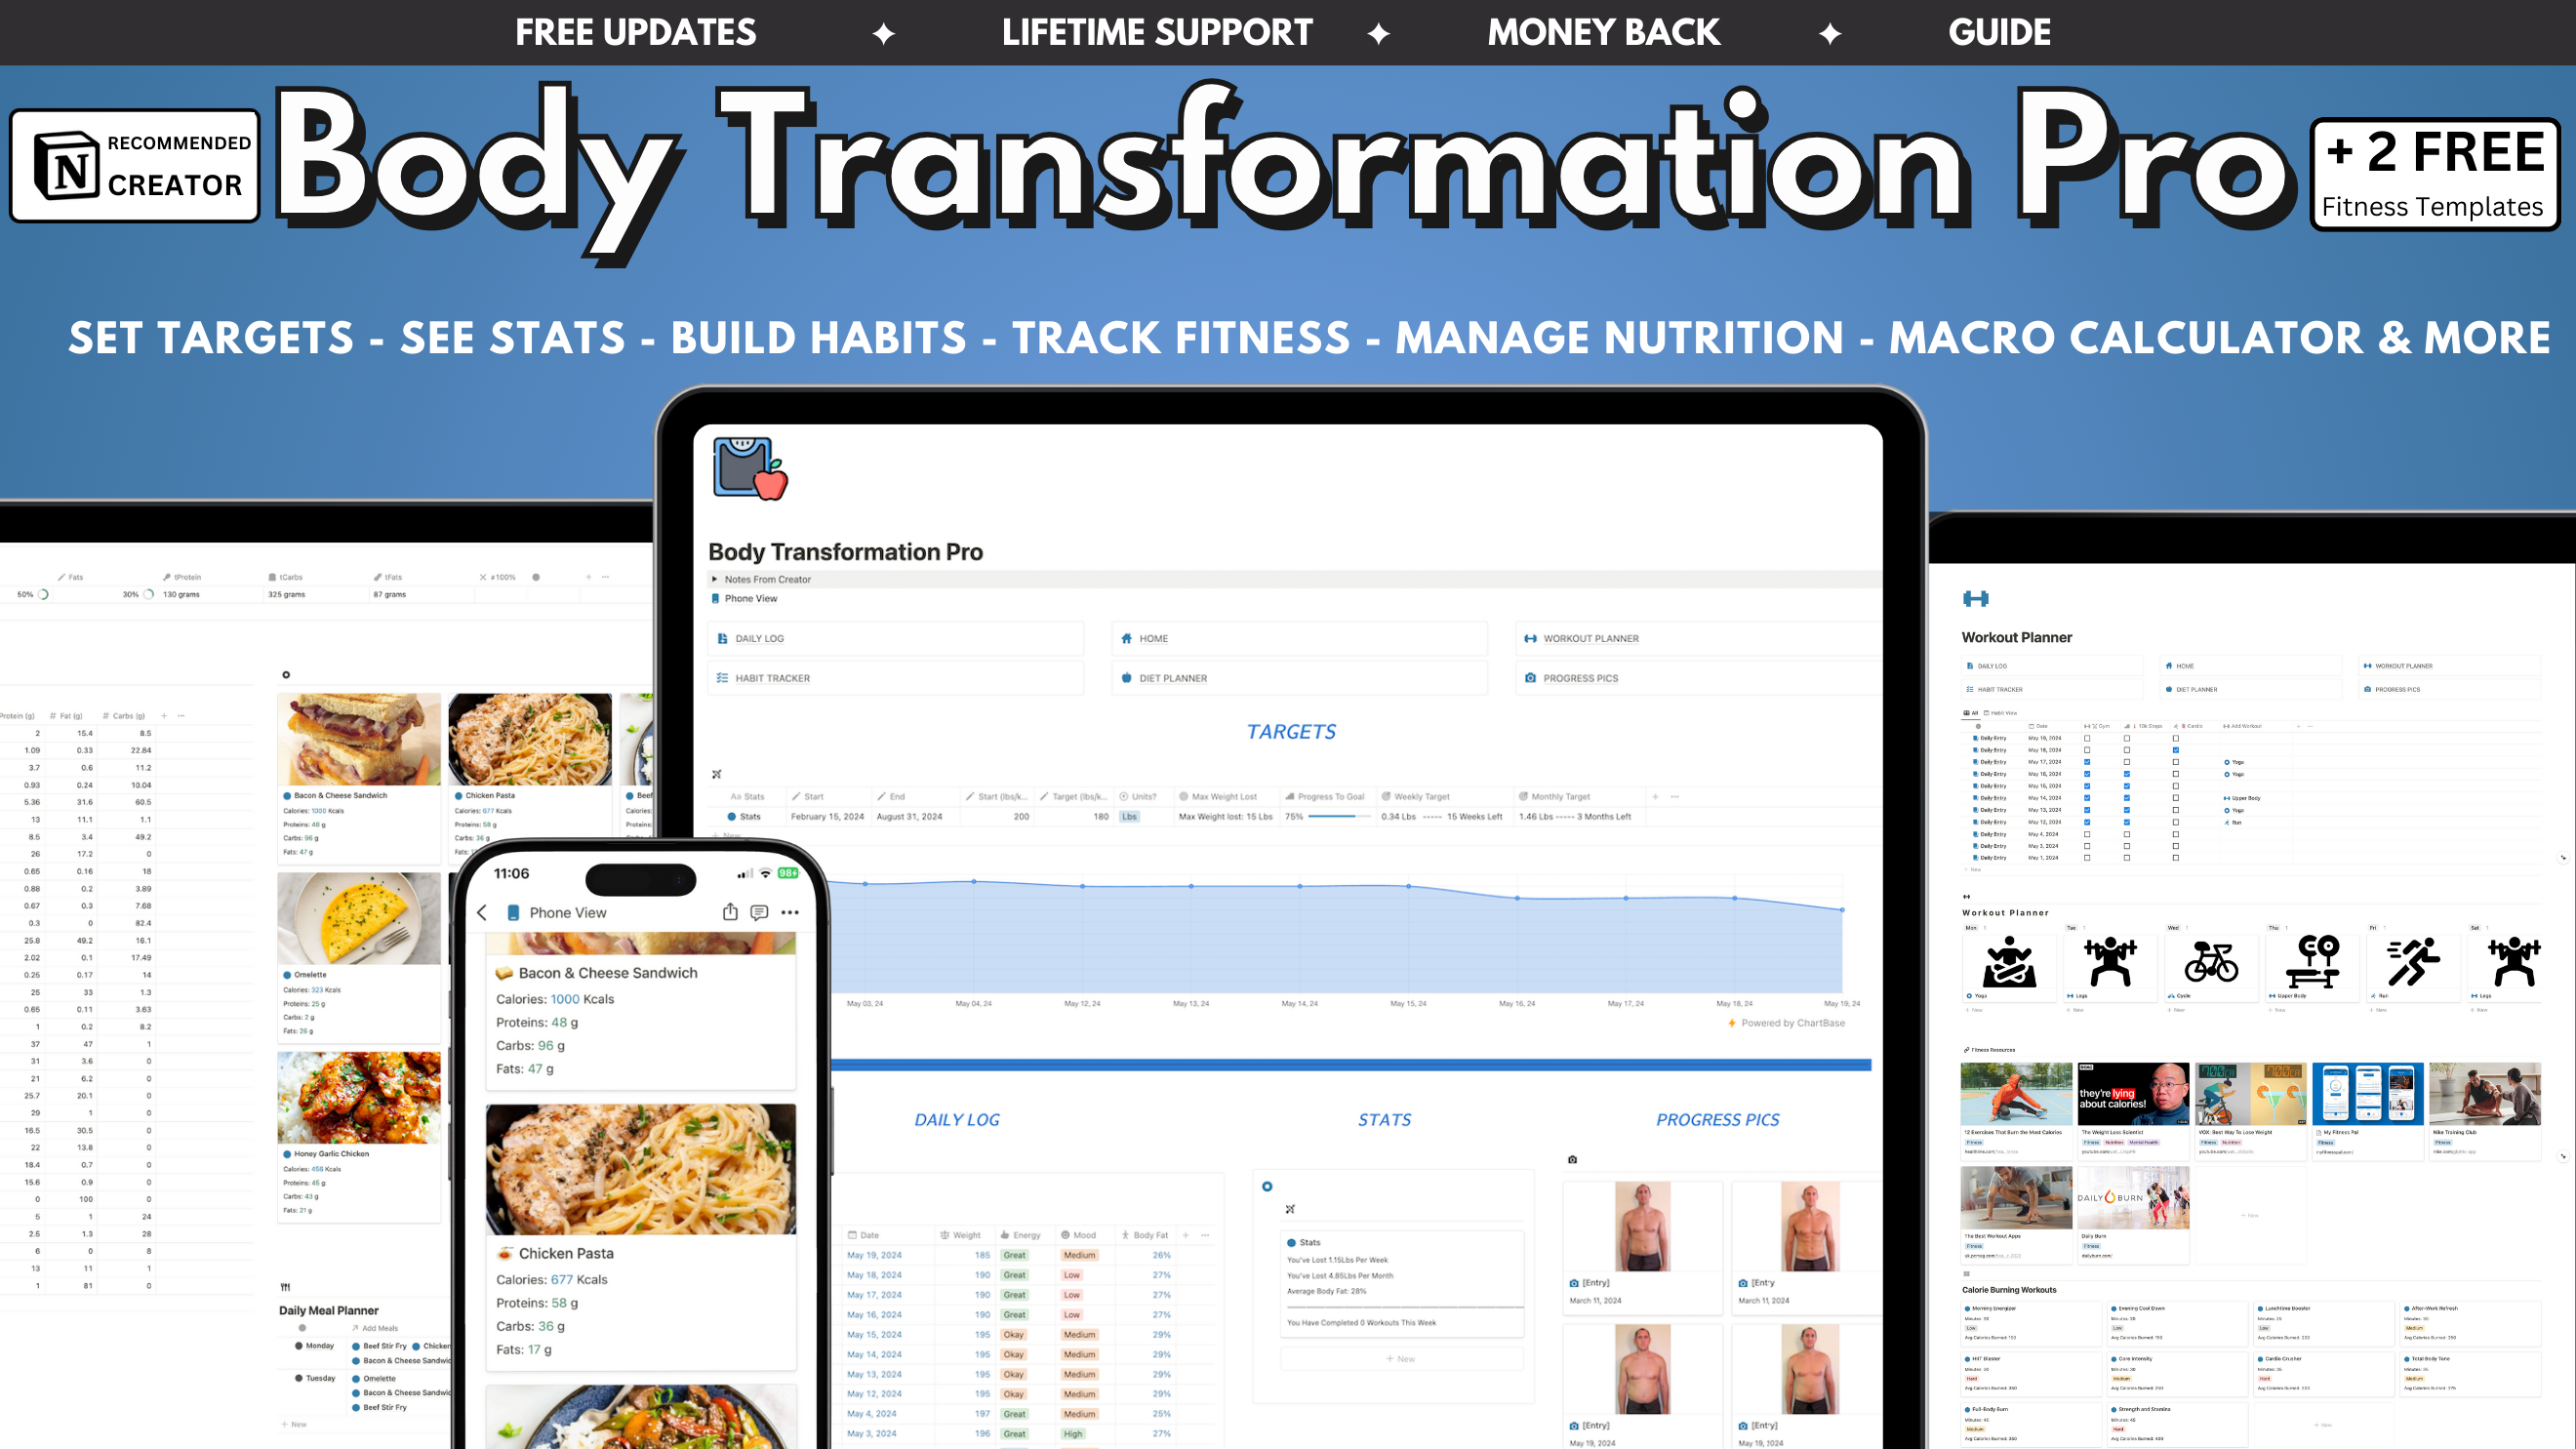 The best tool to achieve transformative weight loss & lose fat. Set weight targets, track progress, manage nutrition, build habits, meal plan, phone view, fitness workouts, online resources, body measurements, 2 free gifts, a money-back guarantee, lifetime improvements & more!  